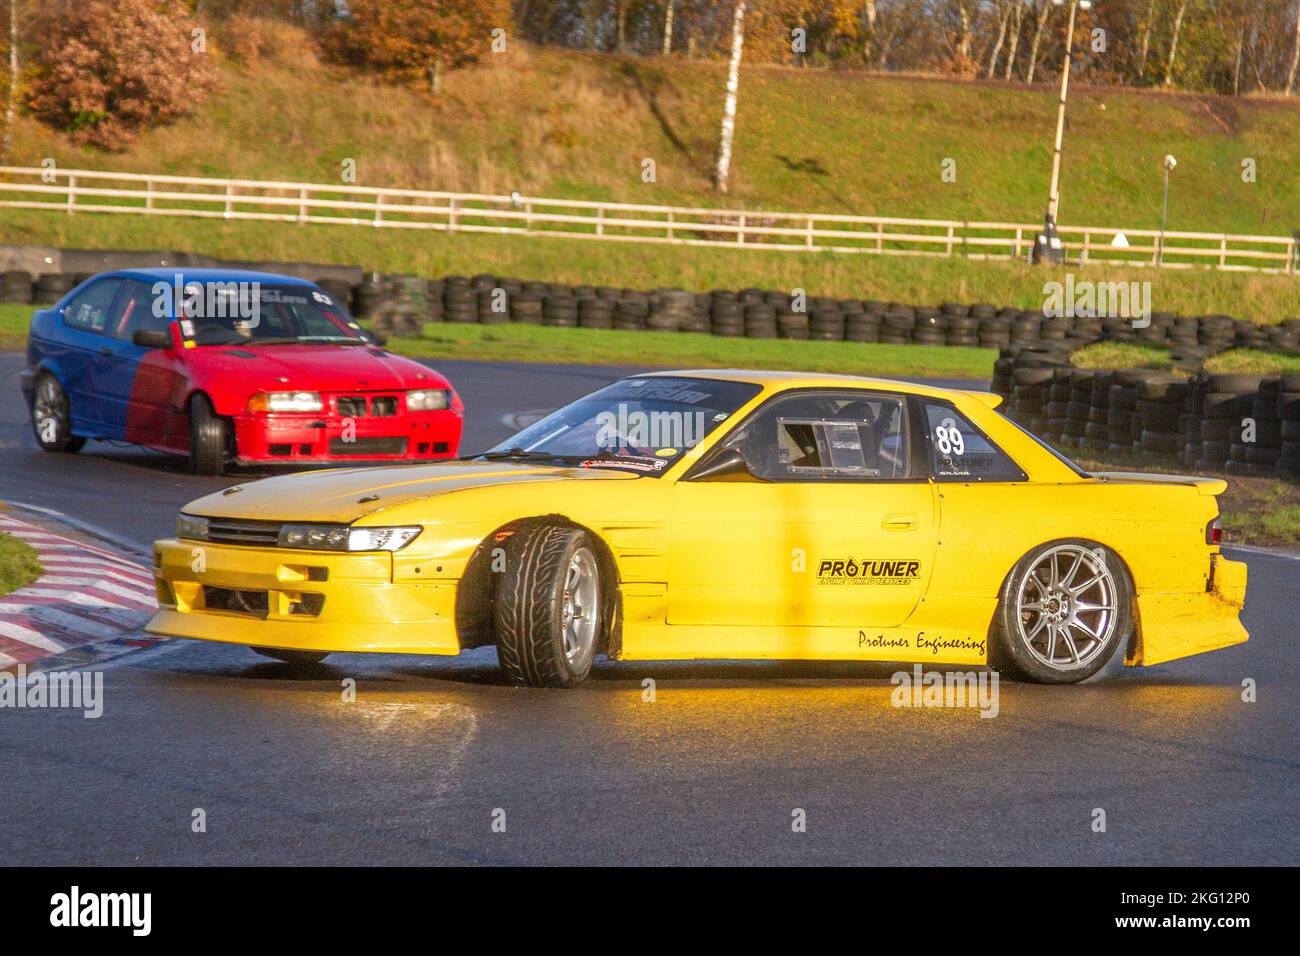 1000hp Lightning Yellow Nissan GT-R Skyline V-Spec - GTspirit Pro Tunes Engineering, Pro Tuner; Rear-wheel-drive car, driving on drift tracks and high-speed cornering on wet roads on a Three Sisters Drift Day in Wigan, UK Stock Photo